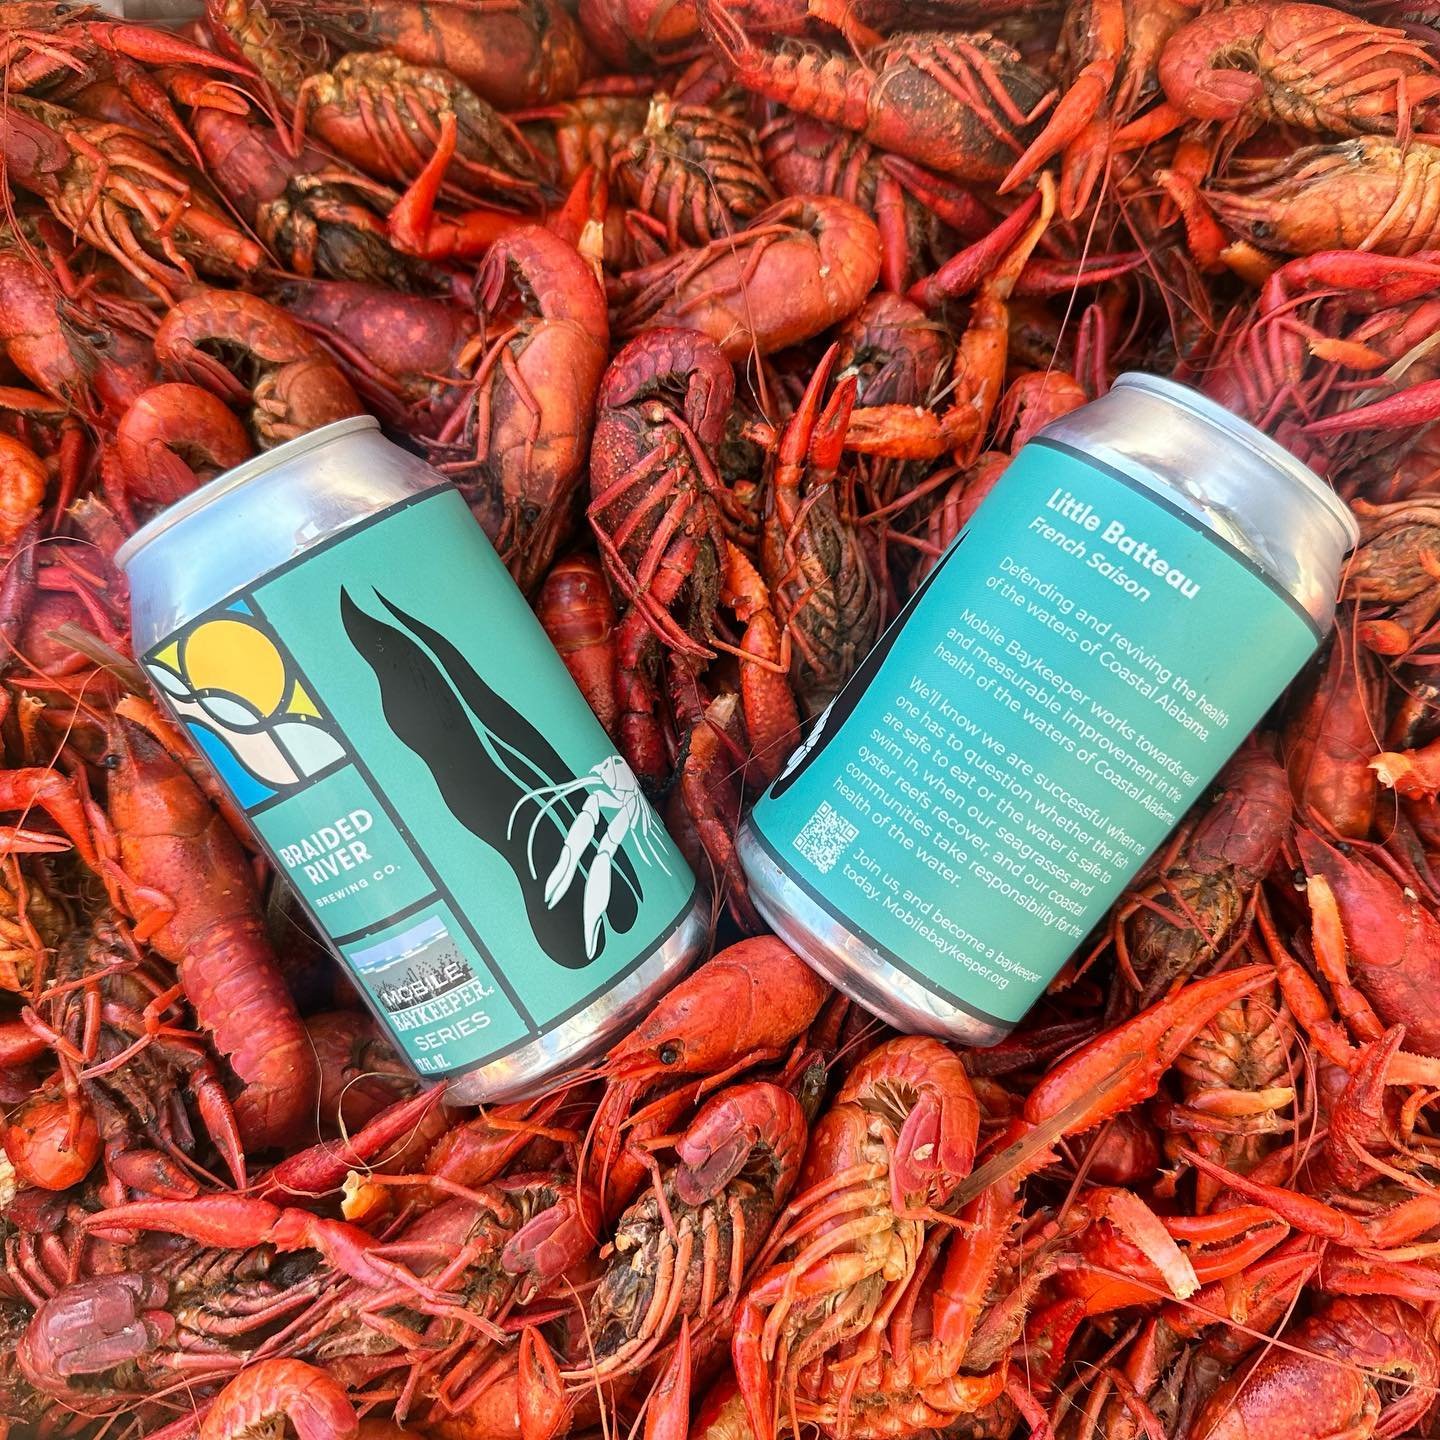 Join us Saturday for the annual Baykeeper Member Crawfish Boil! 

Baykeeper members get all-you-can-eat crawfish and you can join at the event! 

The first 25 members to sign in get a free hugger featuring the art work from our latest Baykeeper Serie